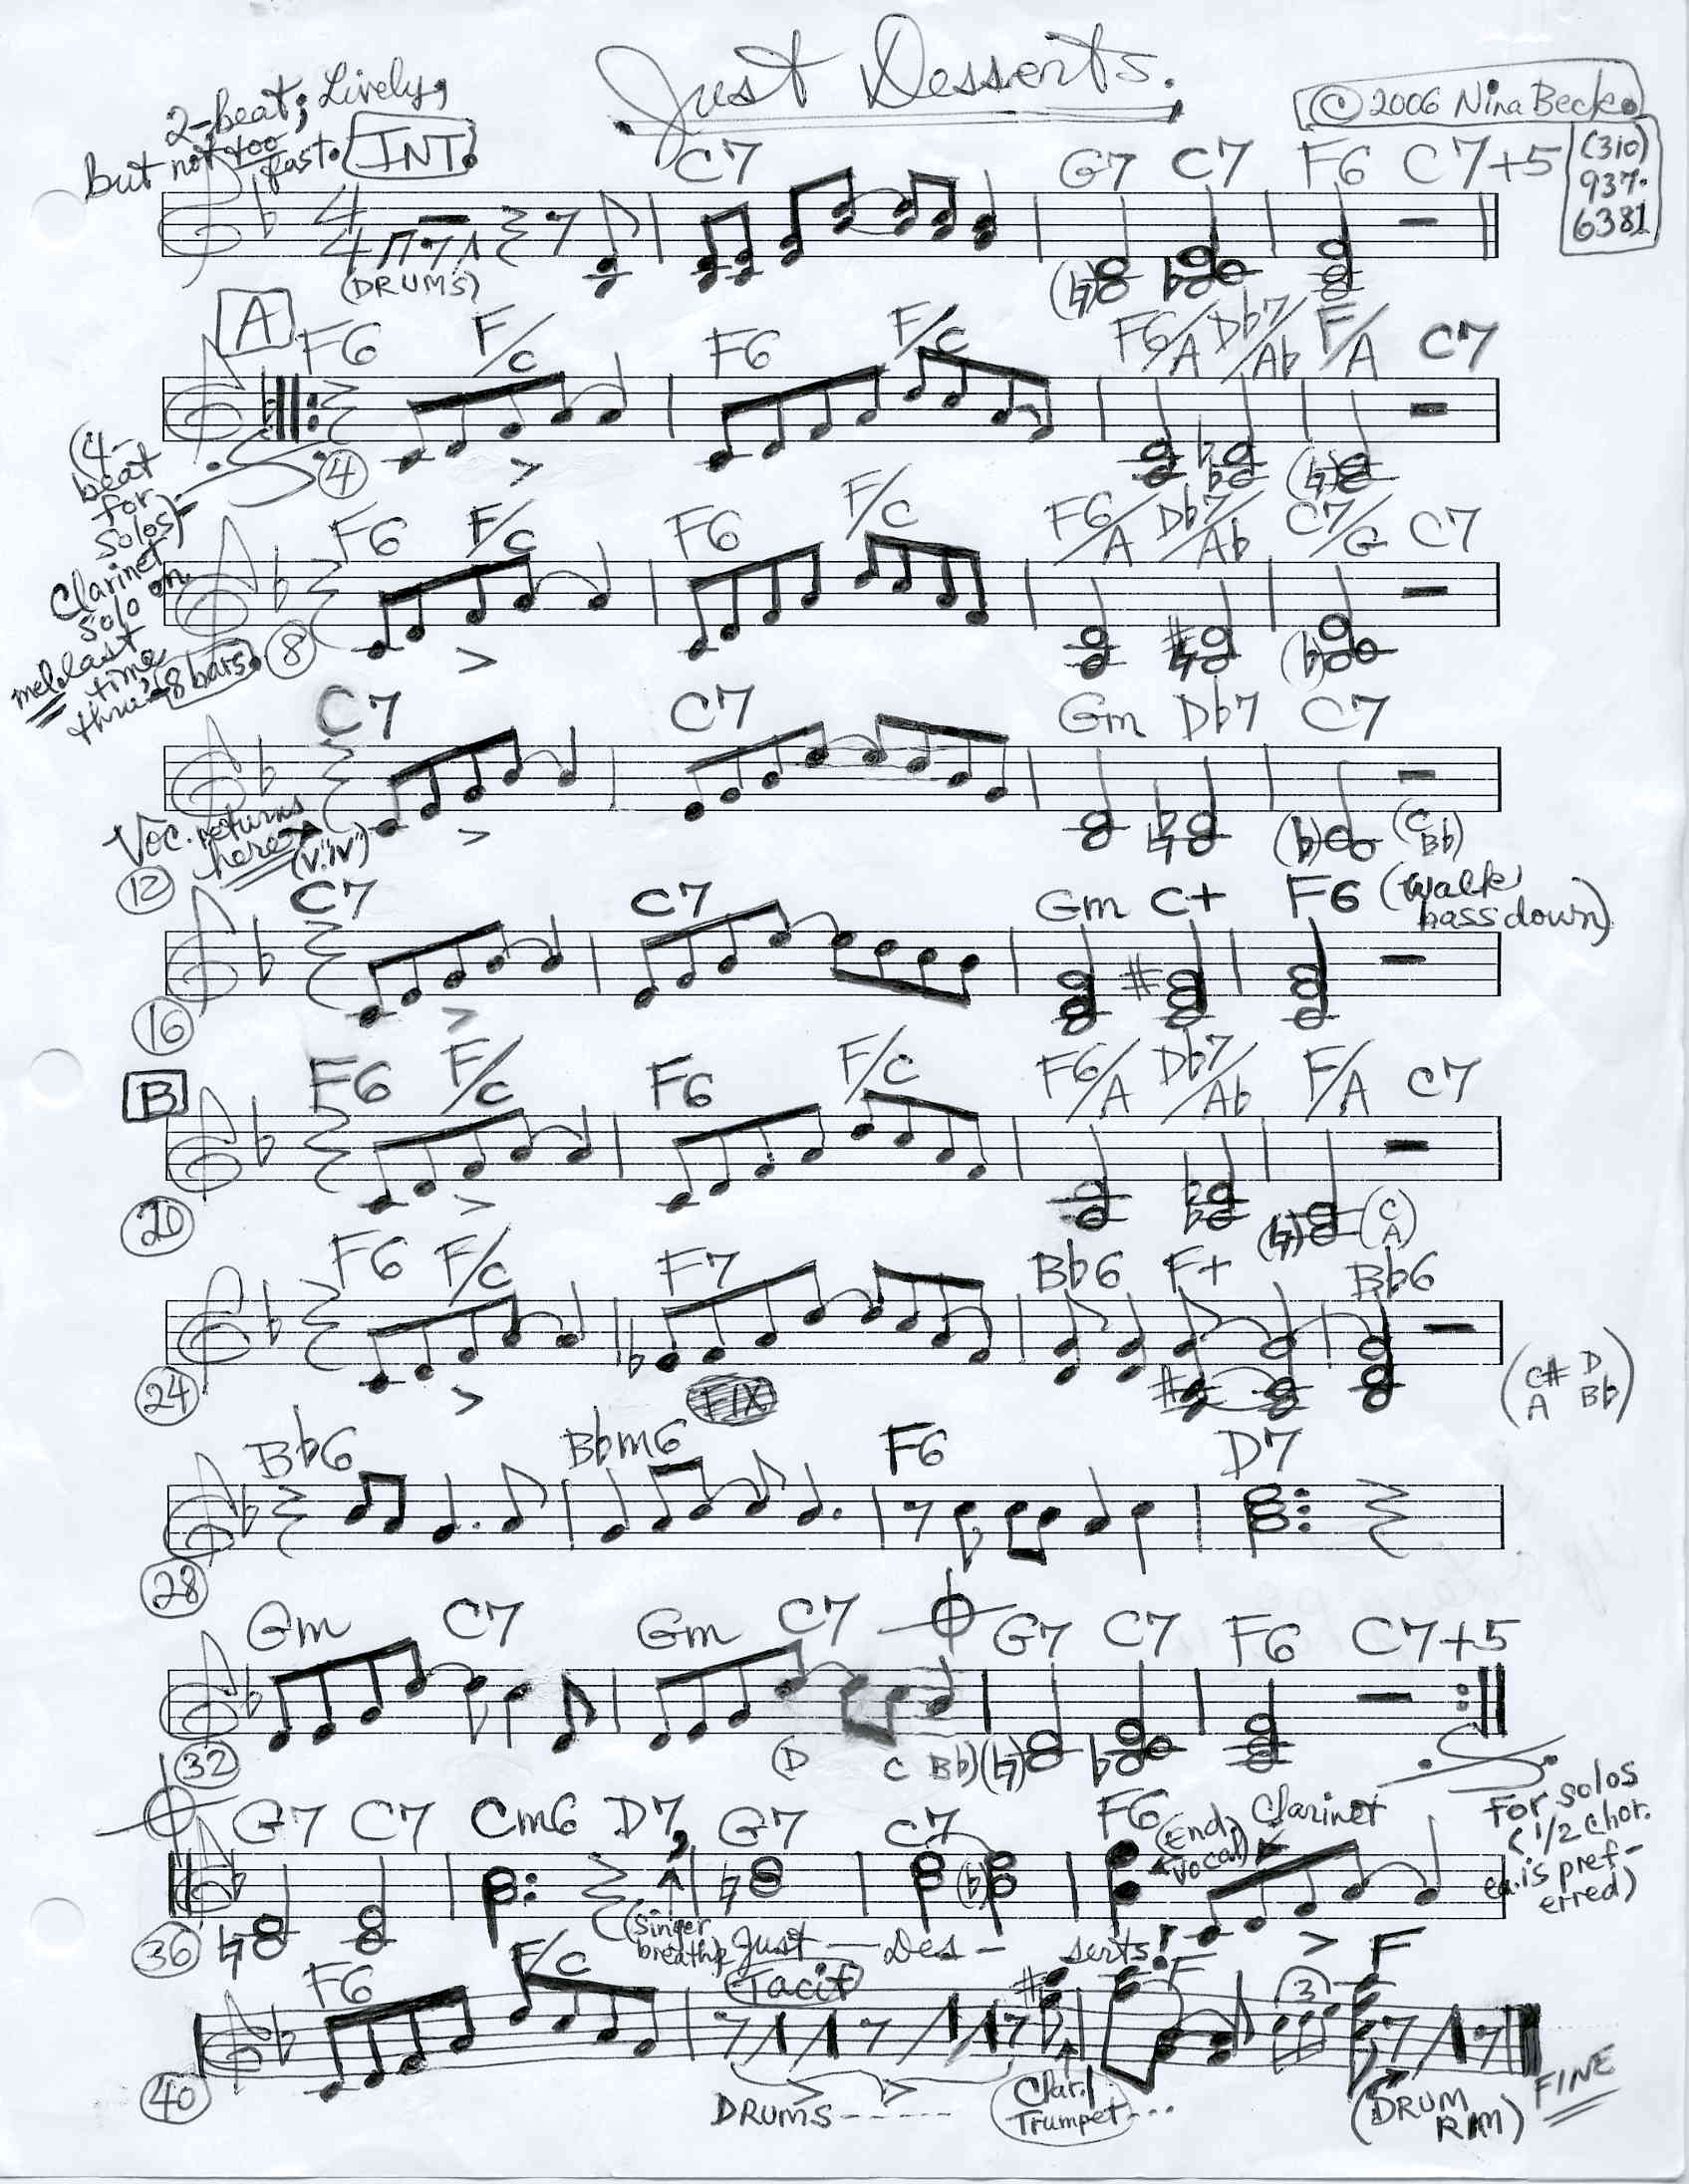 Just Desserts: <P>Sorry - mine is a scanned chart of a Dixieland tune - no music to listen to, but you can play it and bring it to life yourself.  It has fun lyrics - but I didn't want to list them as I have not copywritten this via D.C. yet - just wrote the song at the end of Jan., 2006!! - But the first 2 lines are:  Apple pie and ice cream and a little whipped cream on top / Chocolate sundaes covered up with sprinkles and a cherry pop!...you get the idea.  Toward the end it says Yes I know that they could hurt me / But I could do much worse - / So I've decided, at least for awhile, I'll eat Just Desserts!!...You can get the idea of how it goes - a very fun, novelty song!!...I'm in a 7-piece, all-girl Dixieland band and the singer is starting to learn it and really gets a kick out of it.  Enjoy,</P>  <P>Nina Beck</P>